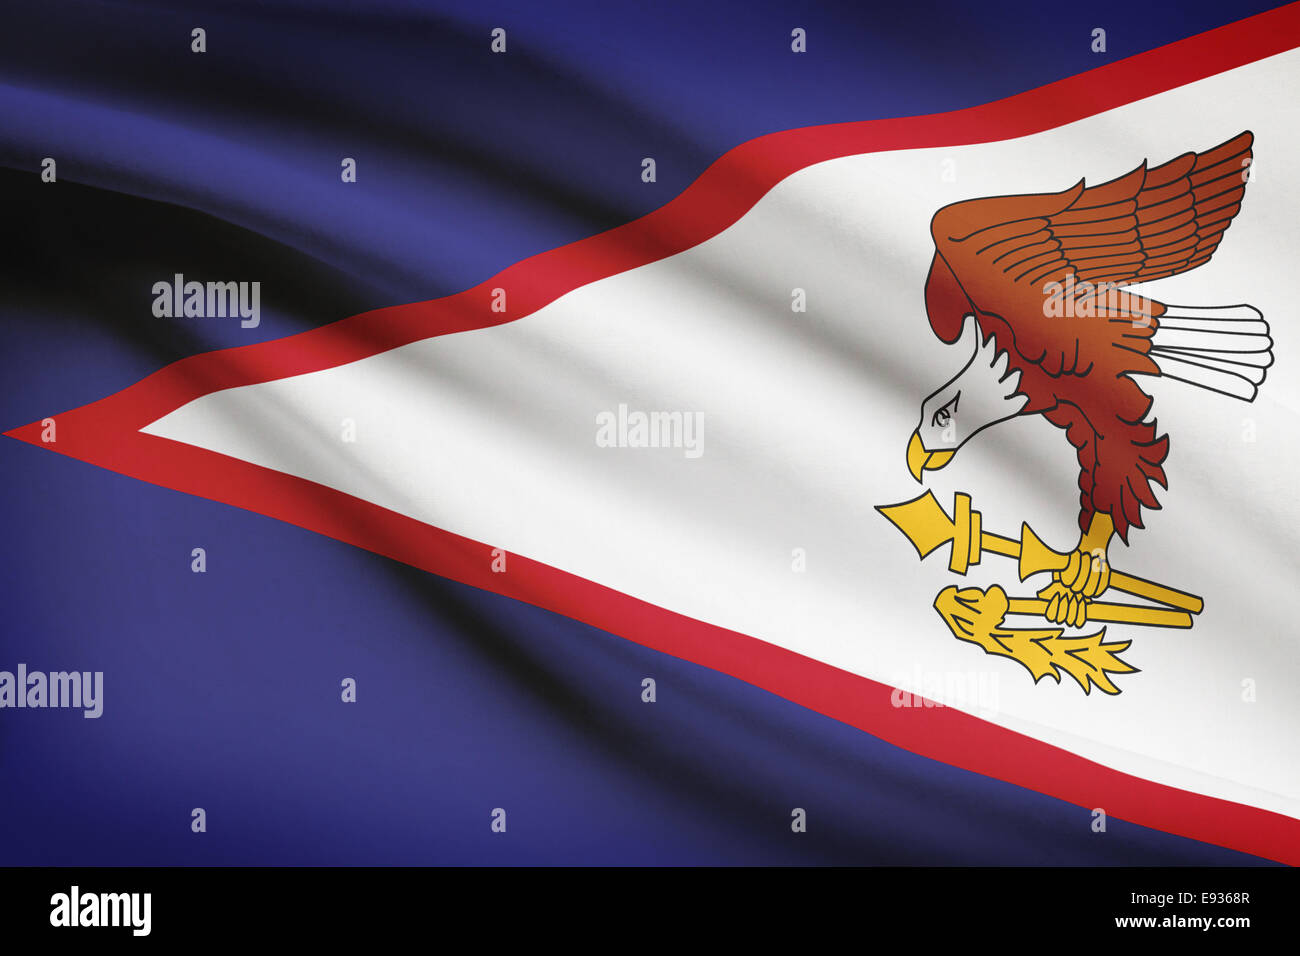 Flag blowing in the wind series - American Samoa Stock Photo